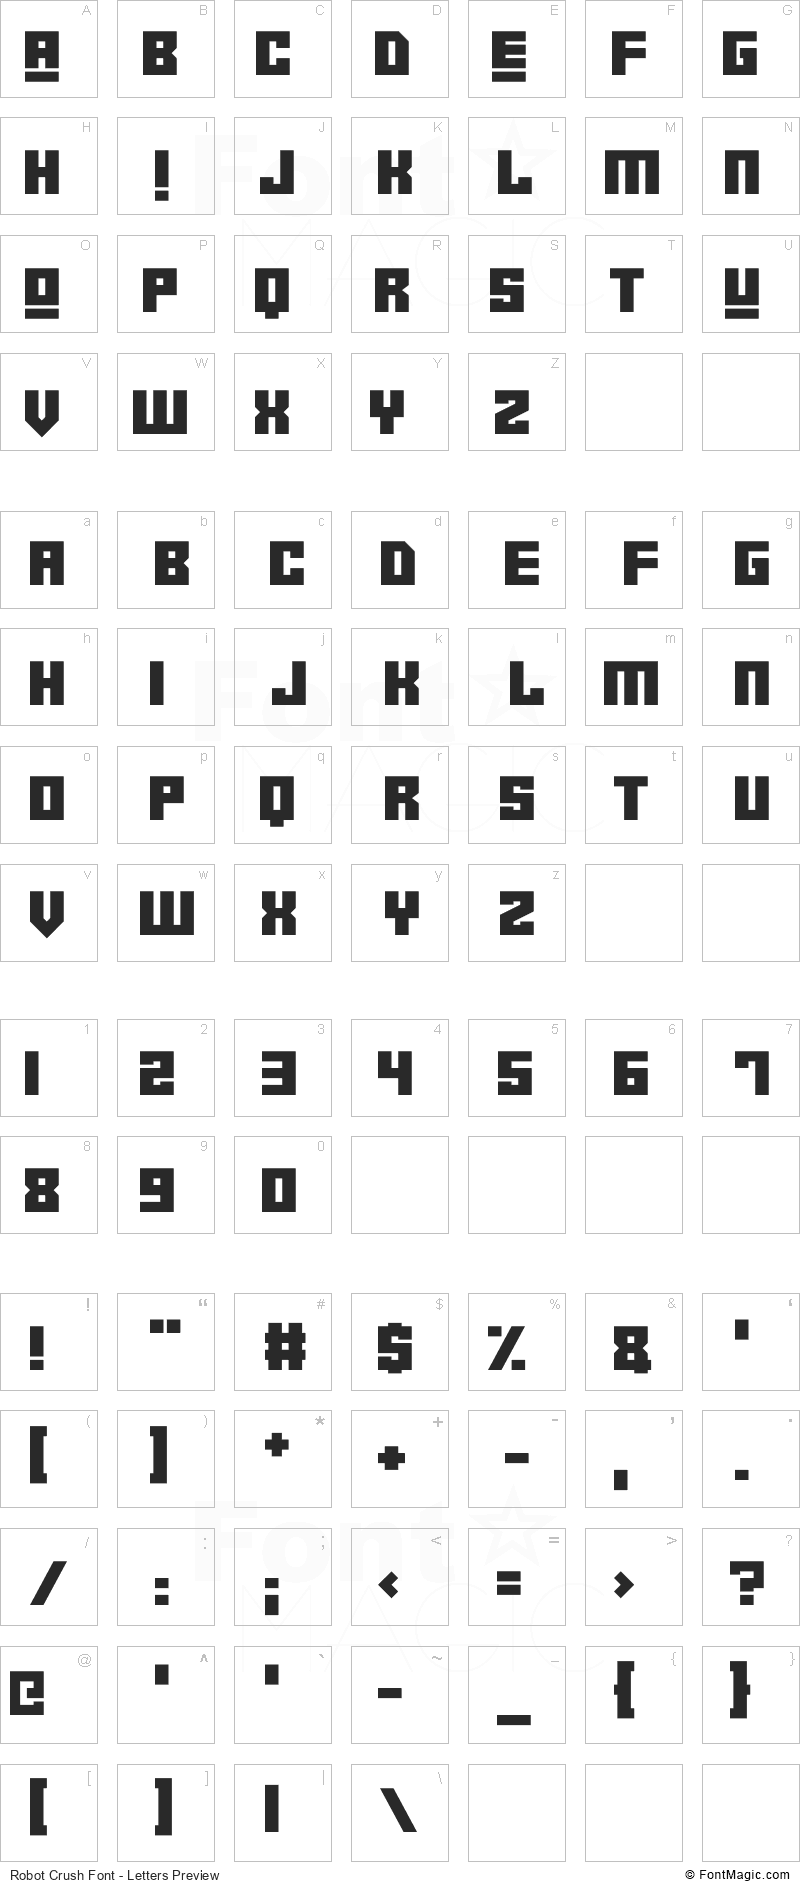 Robot Crush Font - All Latters Preview Chart